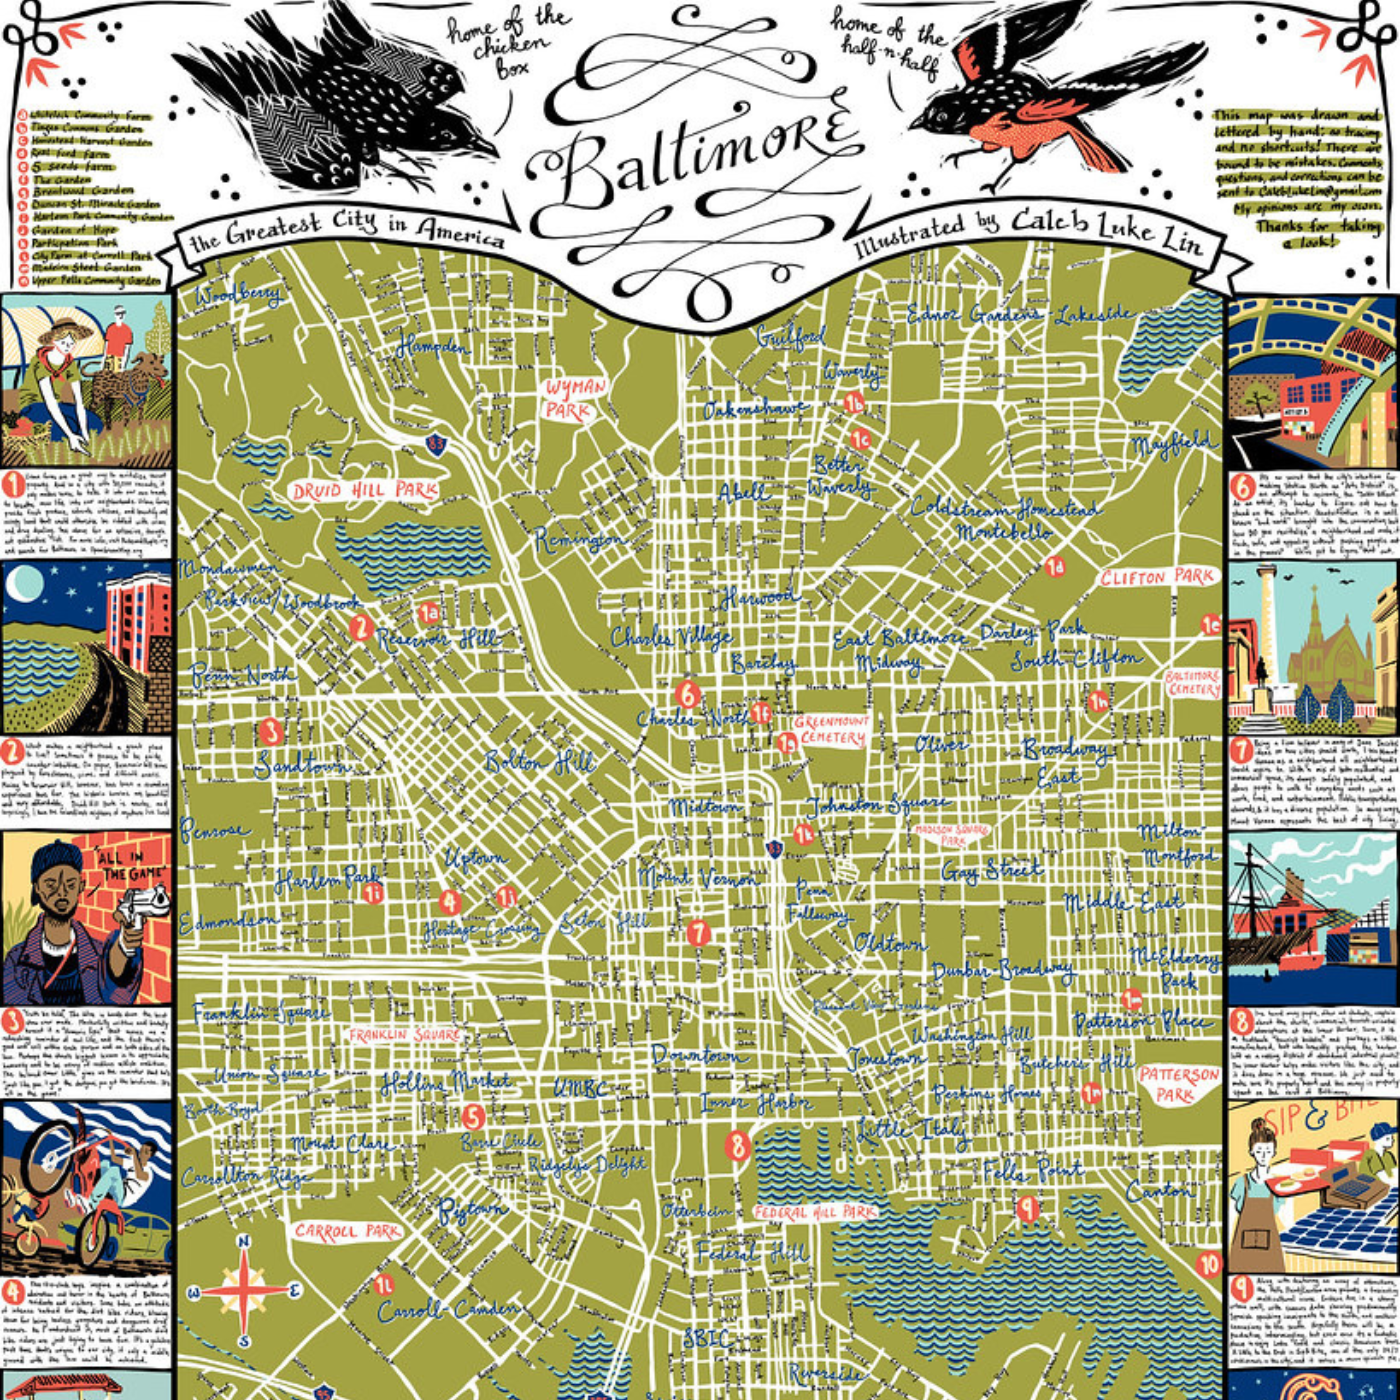 An illustrated map of Baltimore by Caleb Luke Lin. The map of Baltimore shows off the green space in the city with streets drawn in white and bodies of water represented in blue. Small red numbered circles correspond with small boxes around the periphery of the map highlighting and describing significant places in the city.